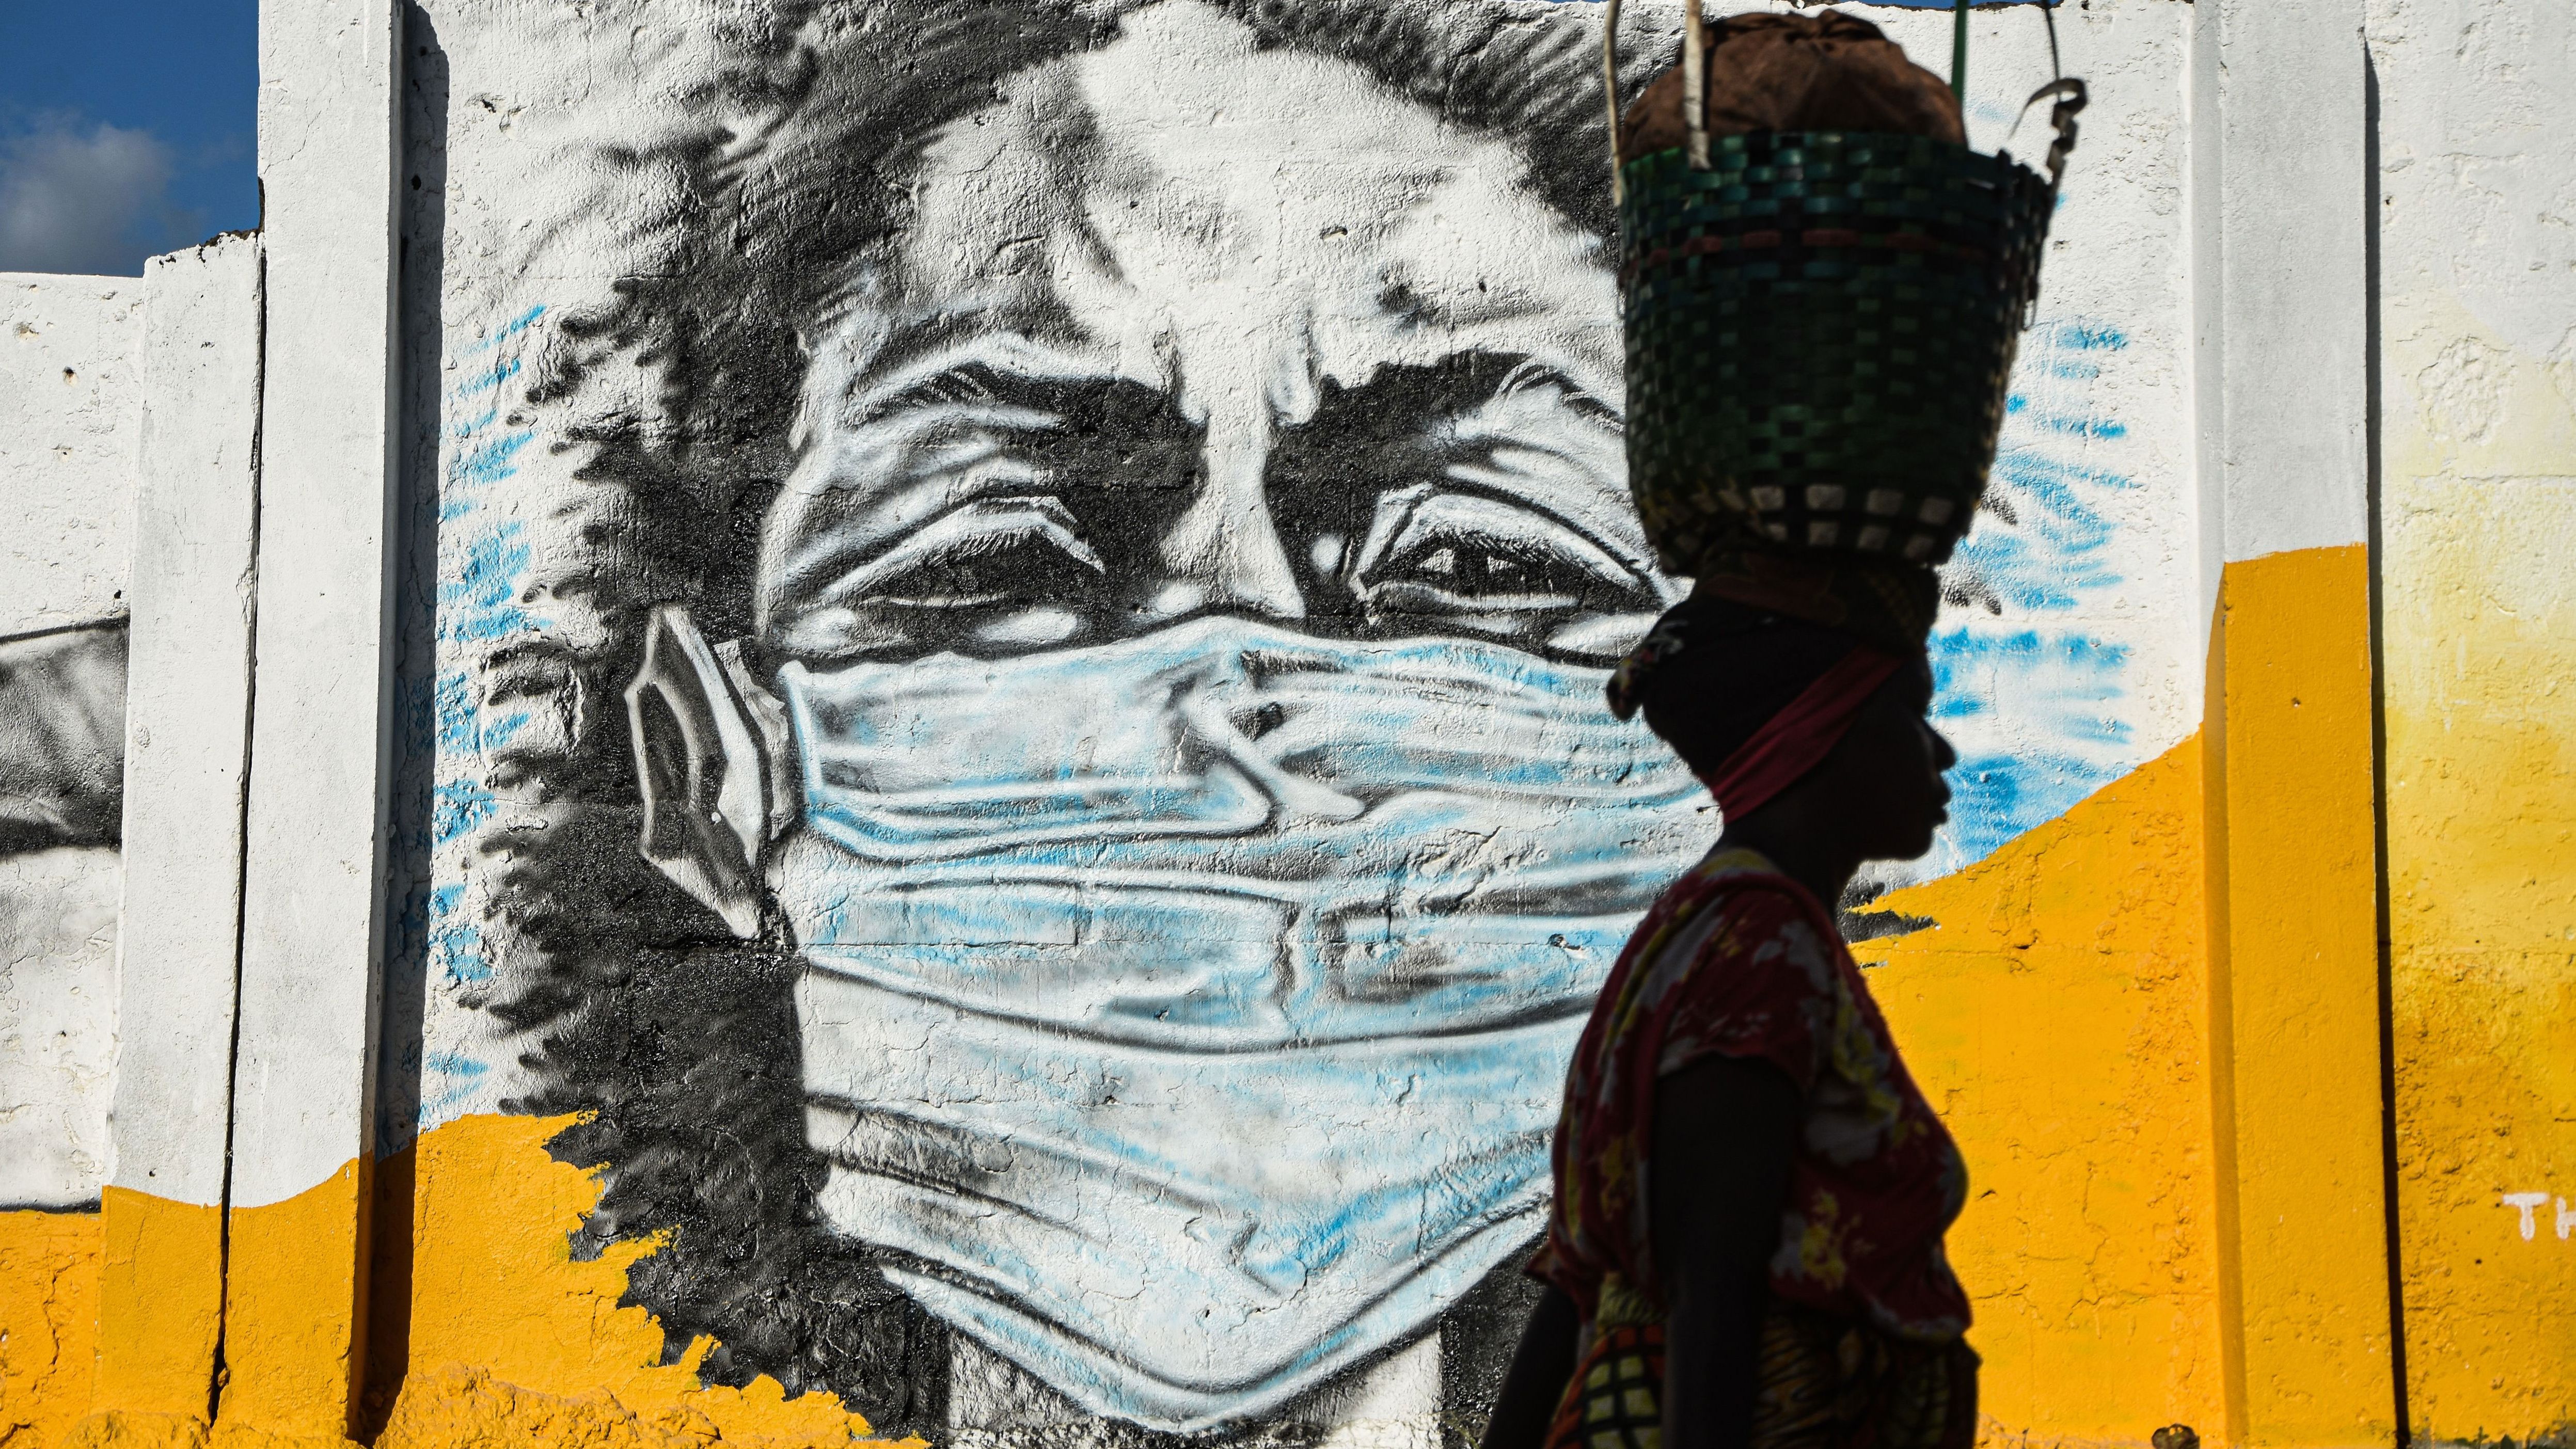 Graffiti painted by the Wachata artists group to raise awareness about wearing masks to avoid the risk of the Covid-19 in Dar es Salaam on May 26, 2020.